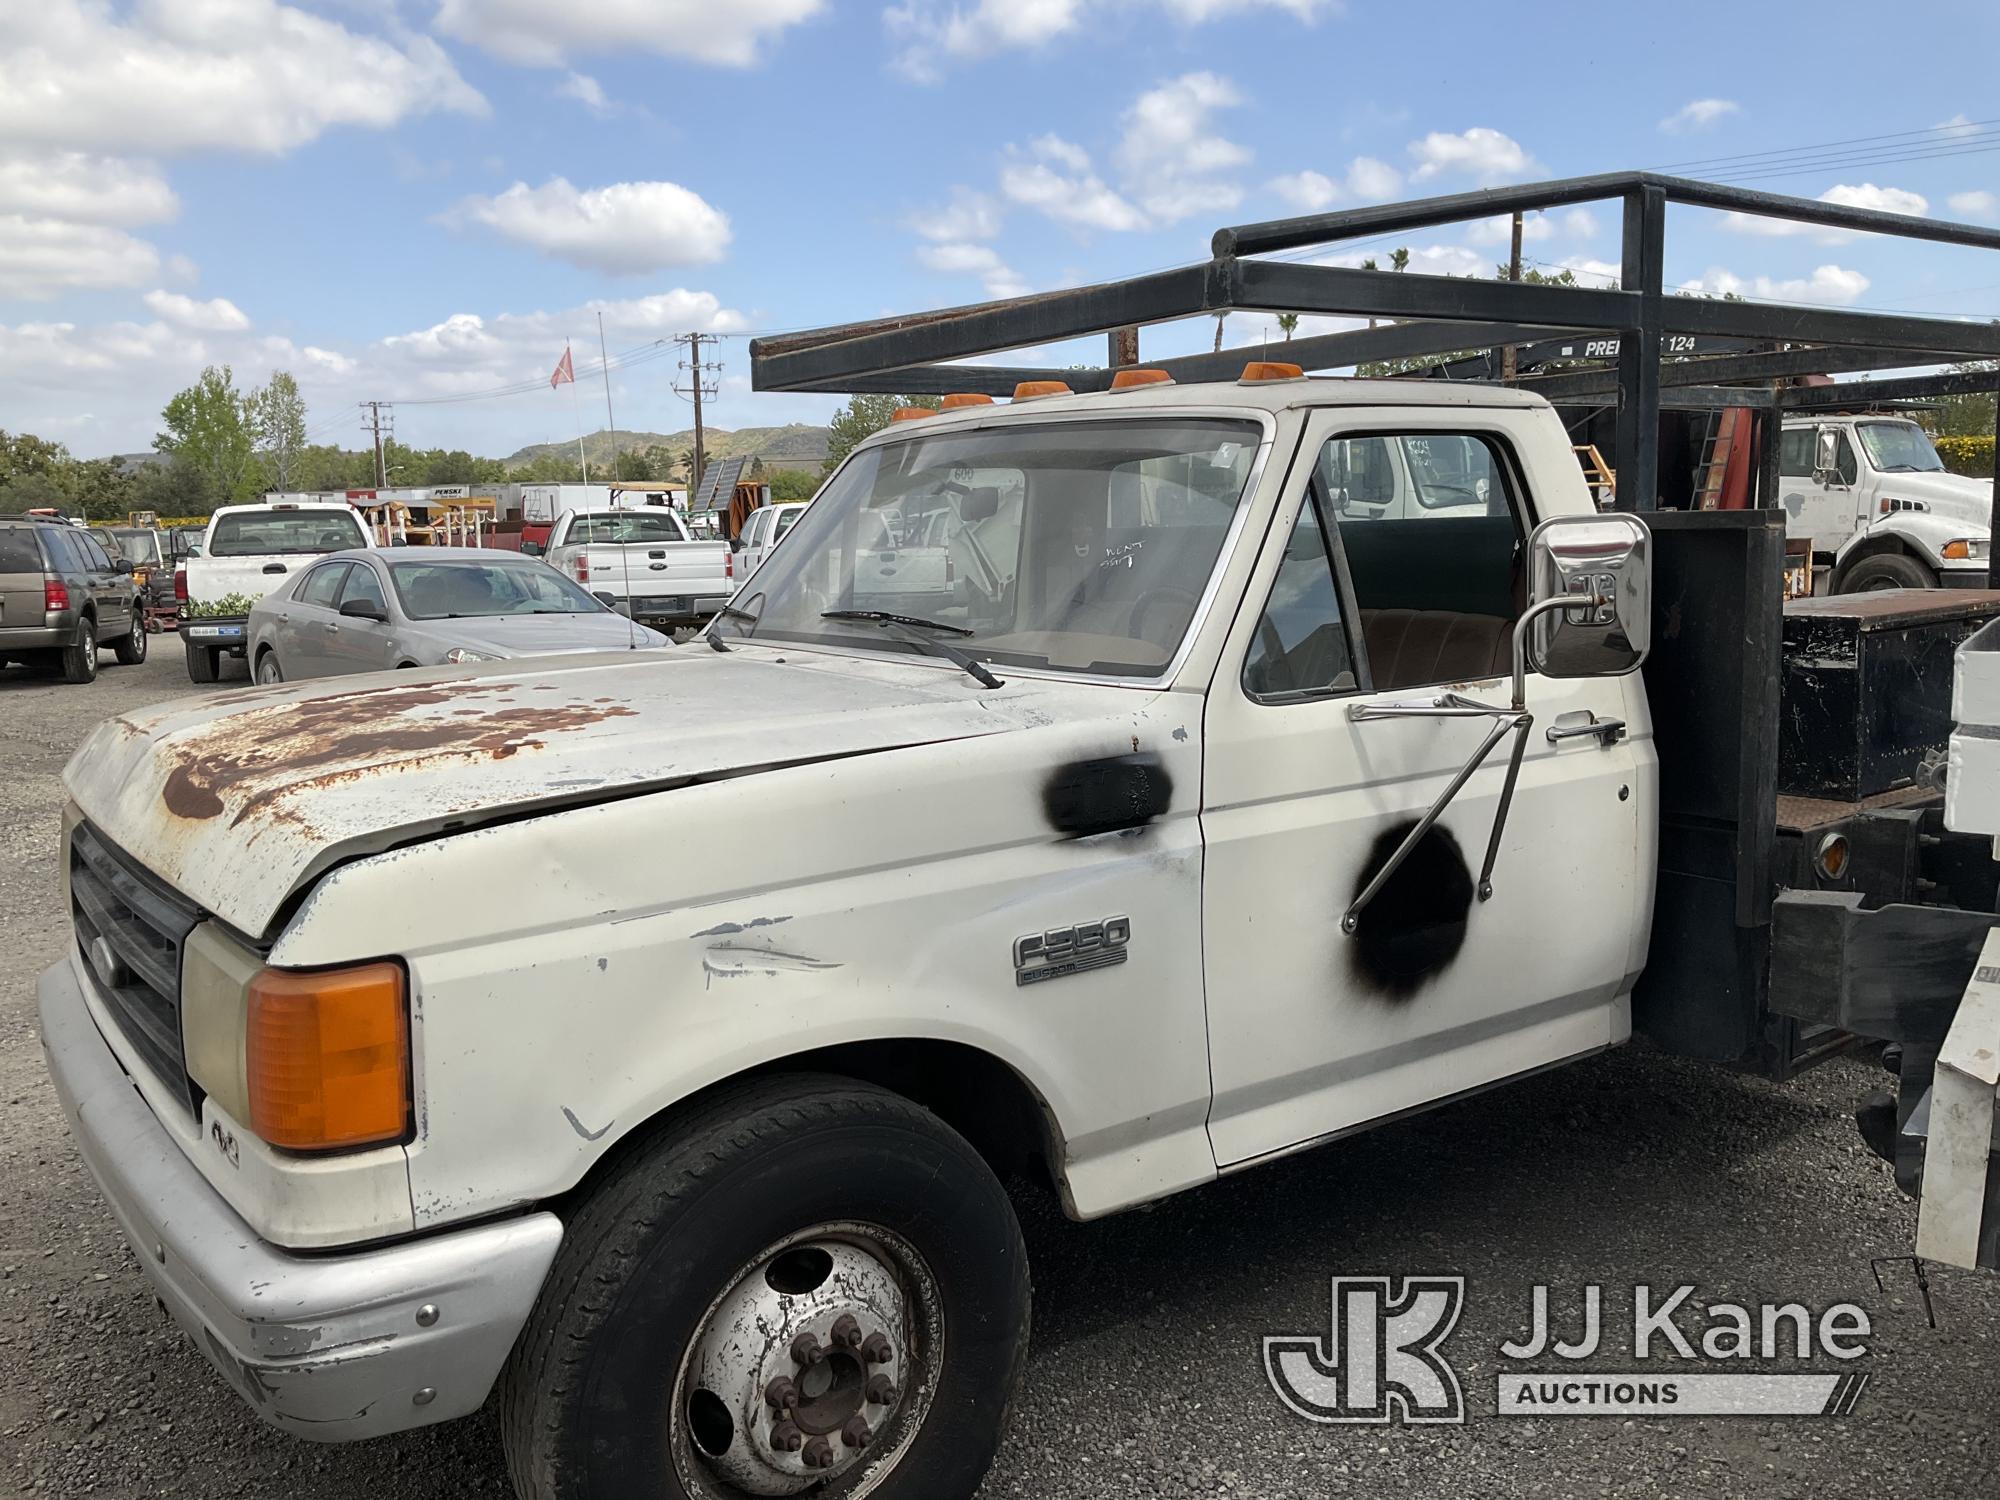 (Jurupa Valley, CA) 1987 Ford F350 Cab & Chassis Cranks Does Not Start, Missing GVWR Sticker